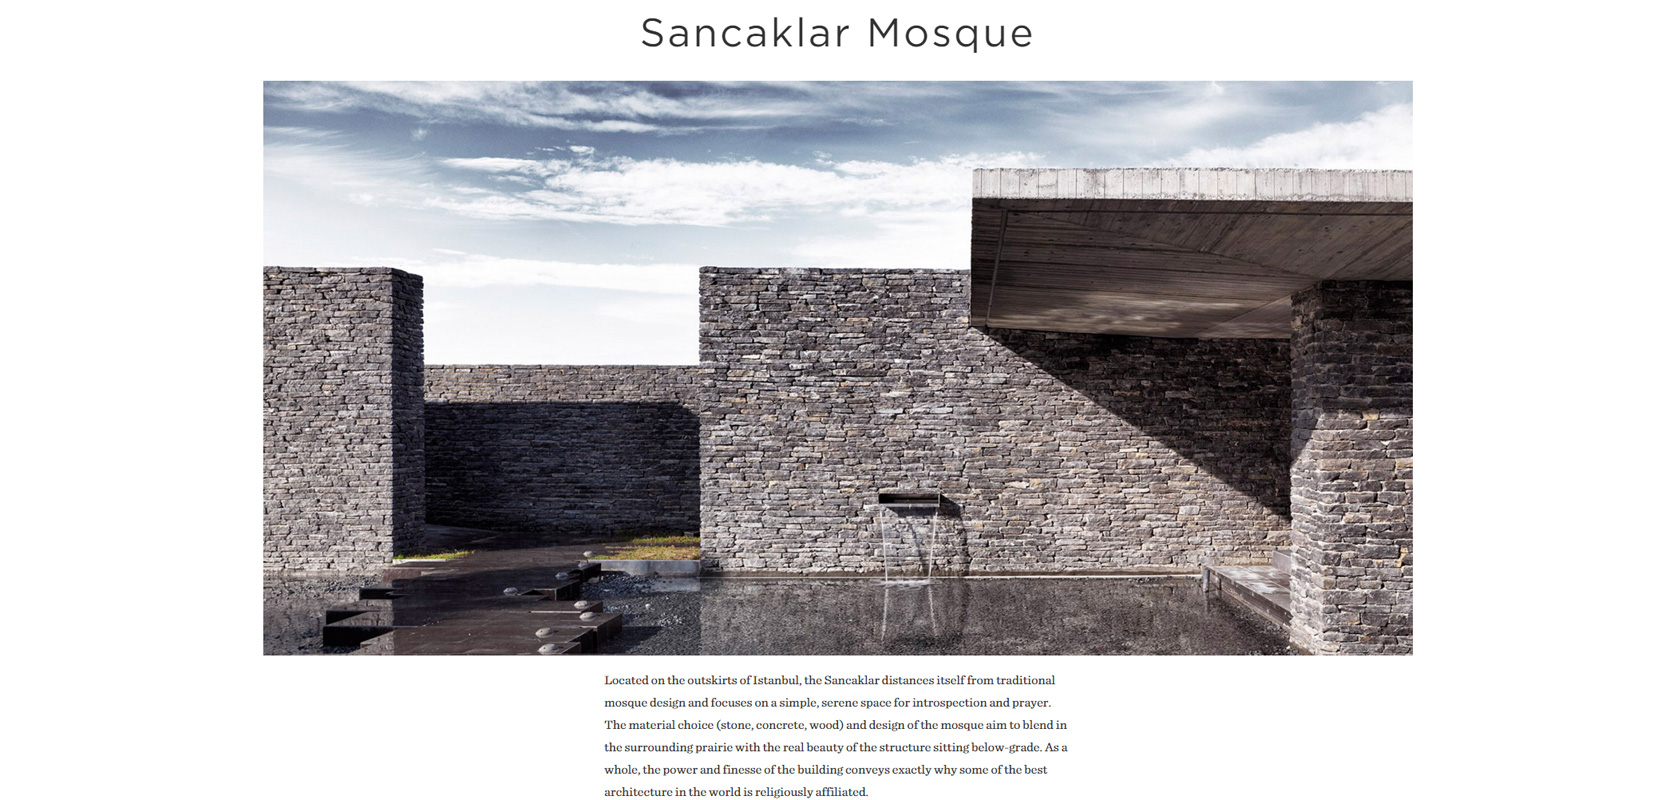 EAA – EMRE AROLAT ARCHITECTURE | Sancaklar  Mosque Does More With Less